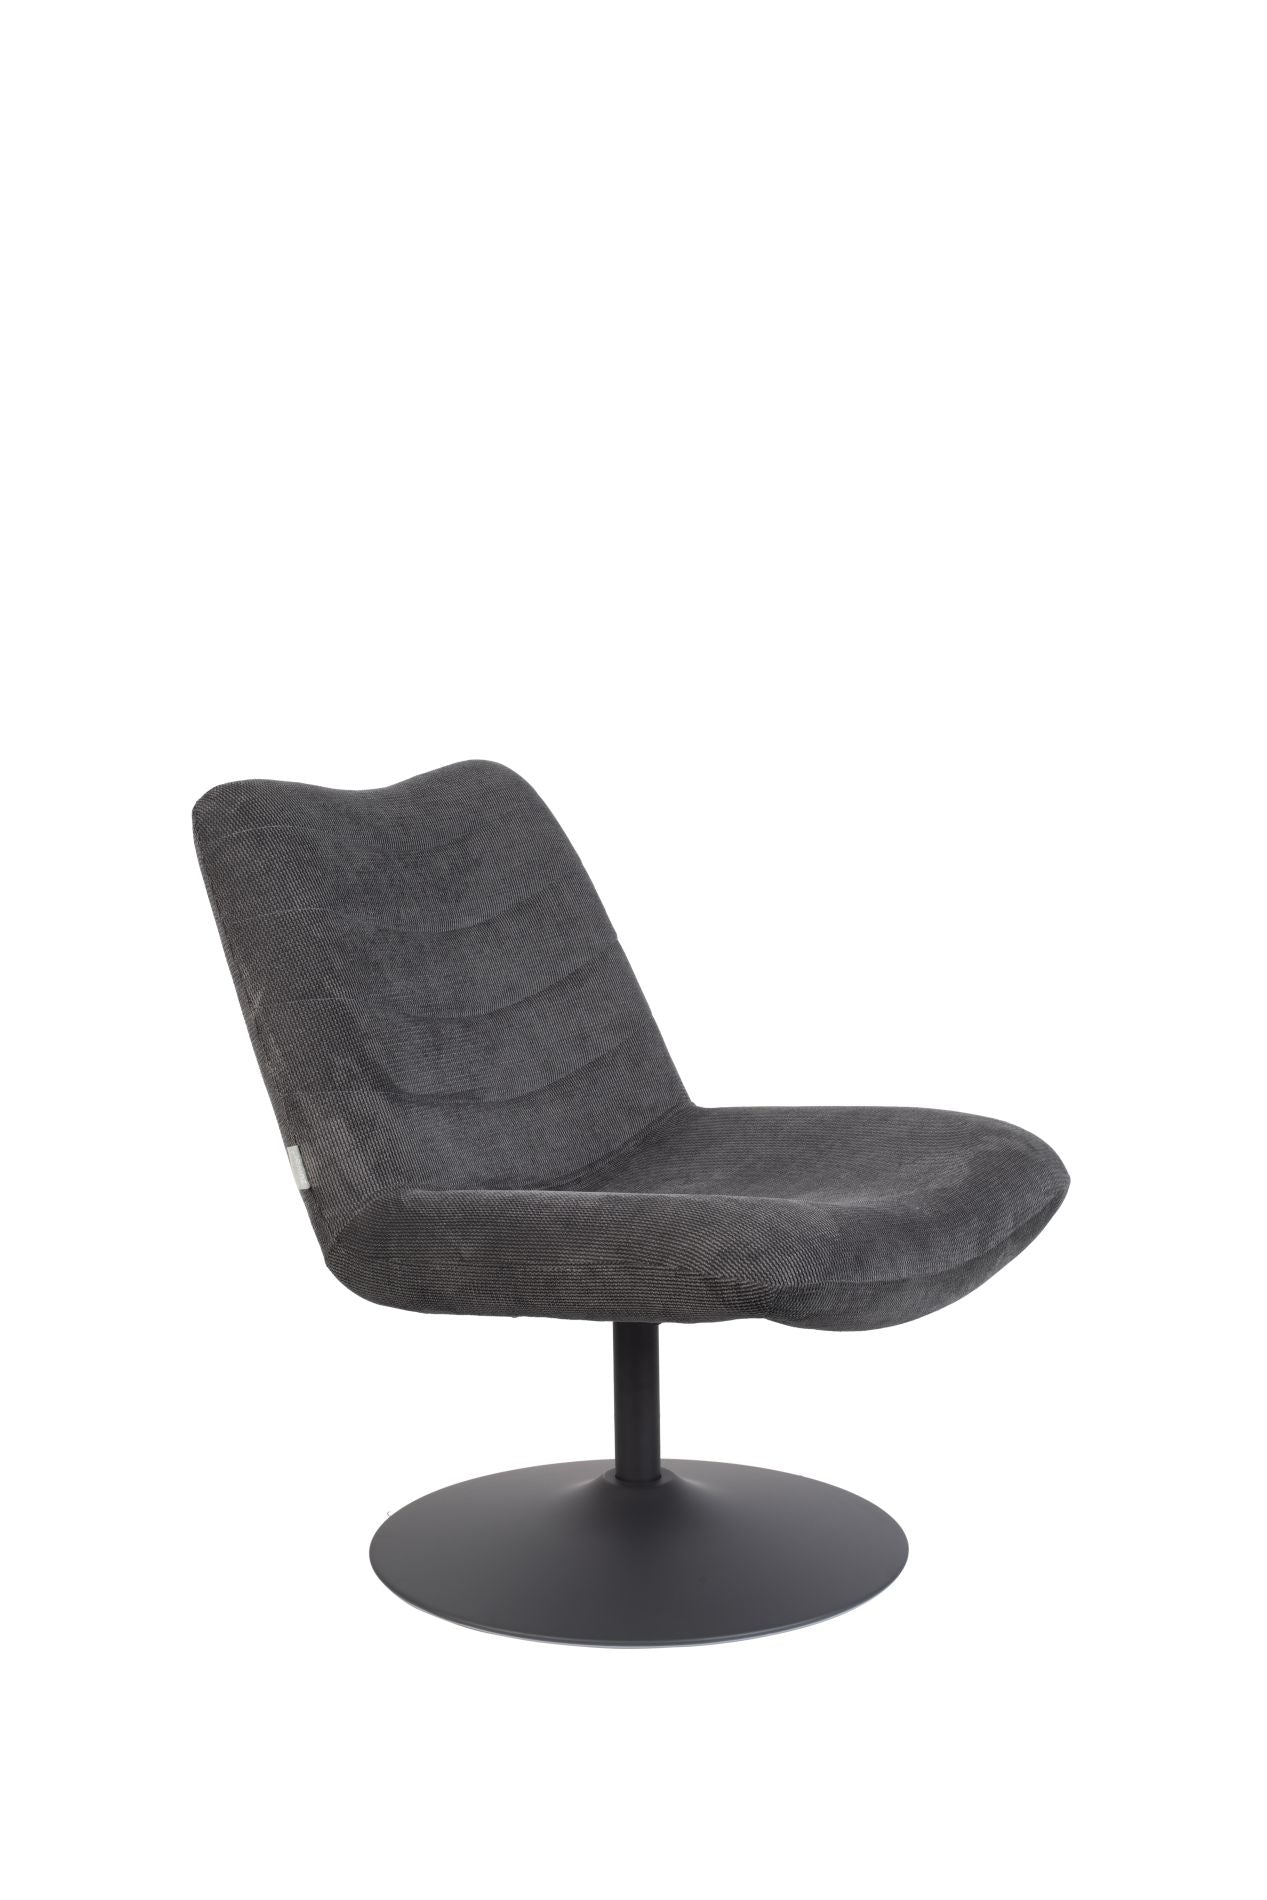 Zuiver Bubba fauteuil donkergrijs